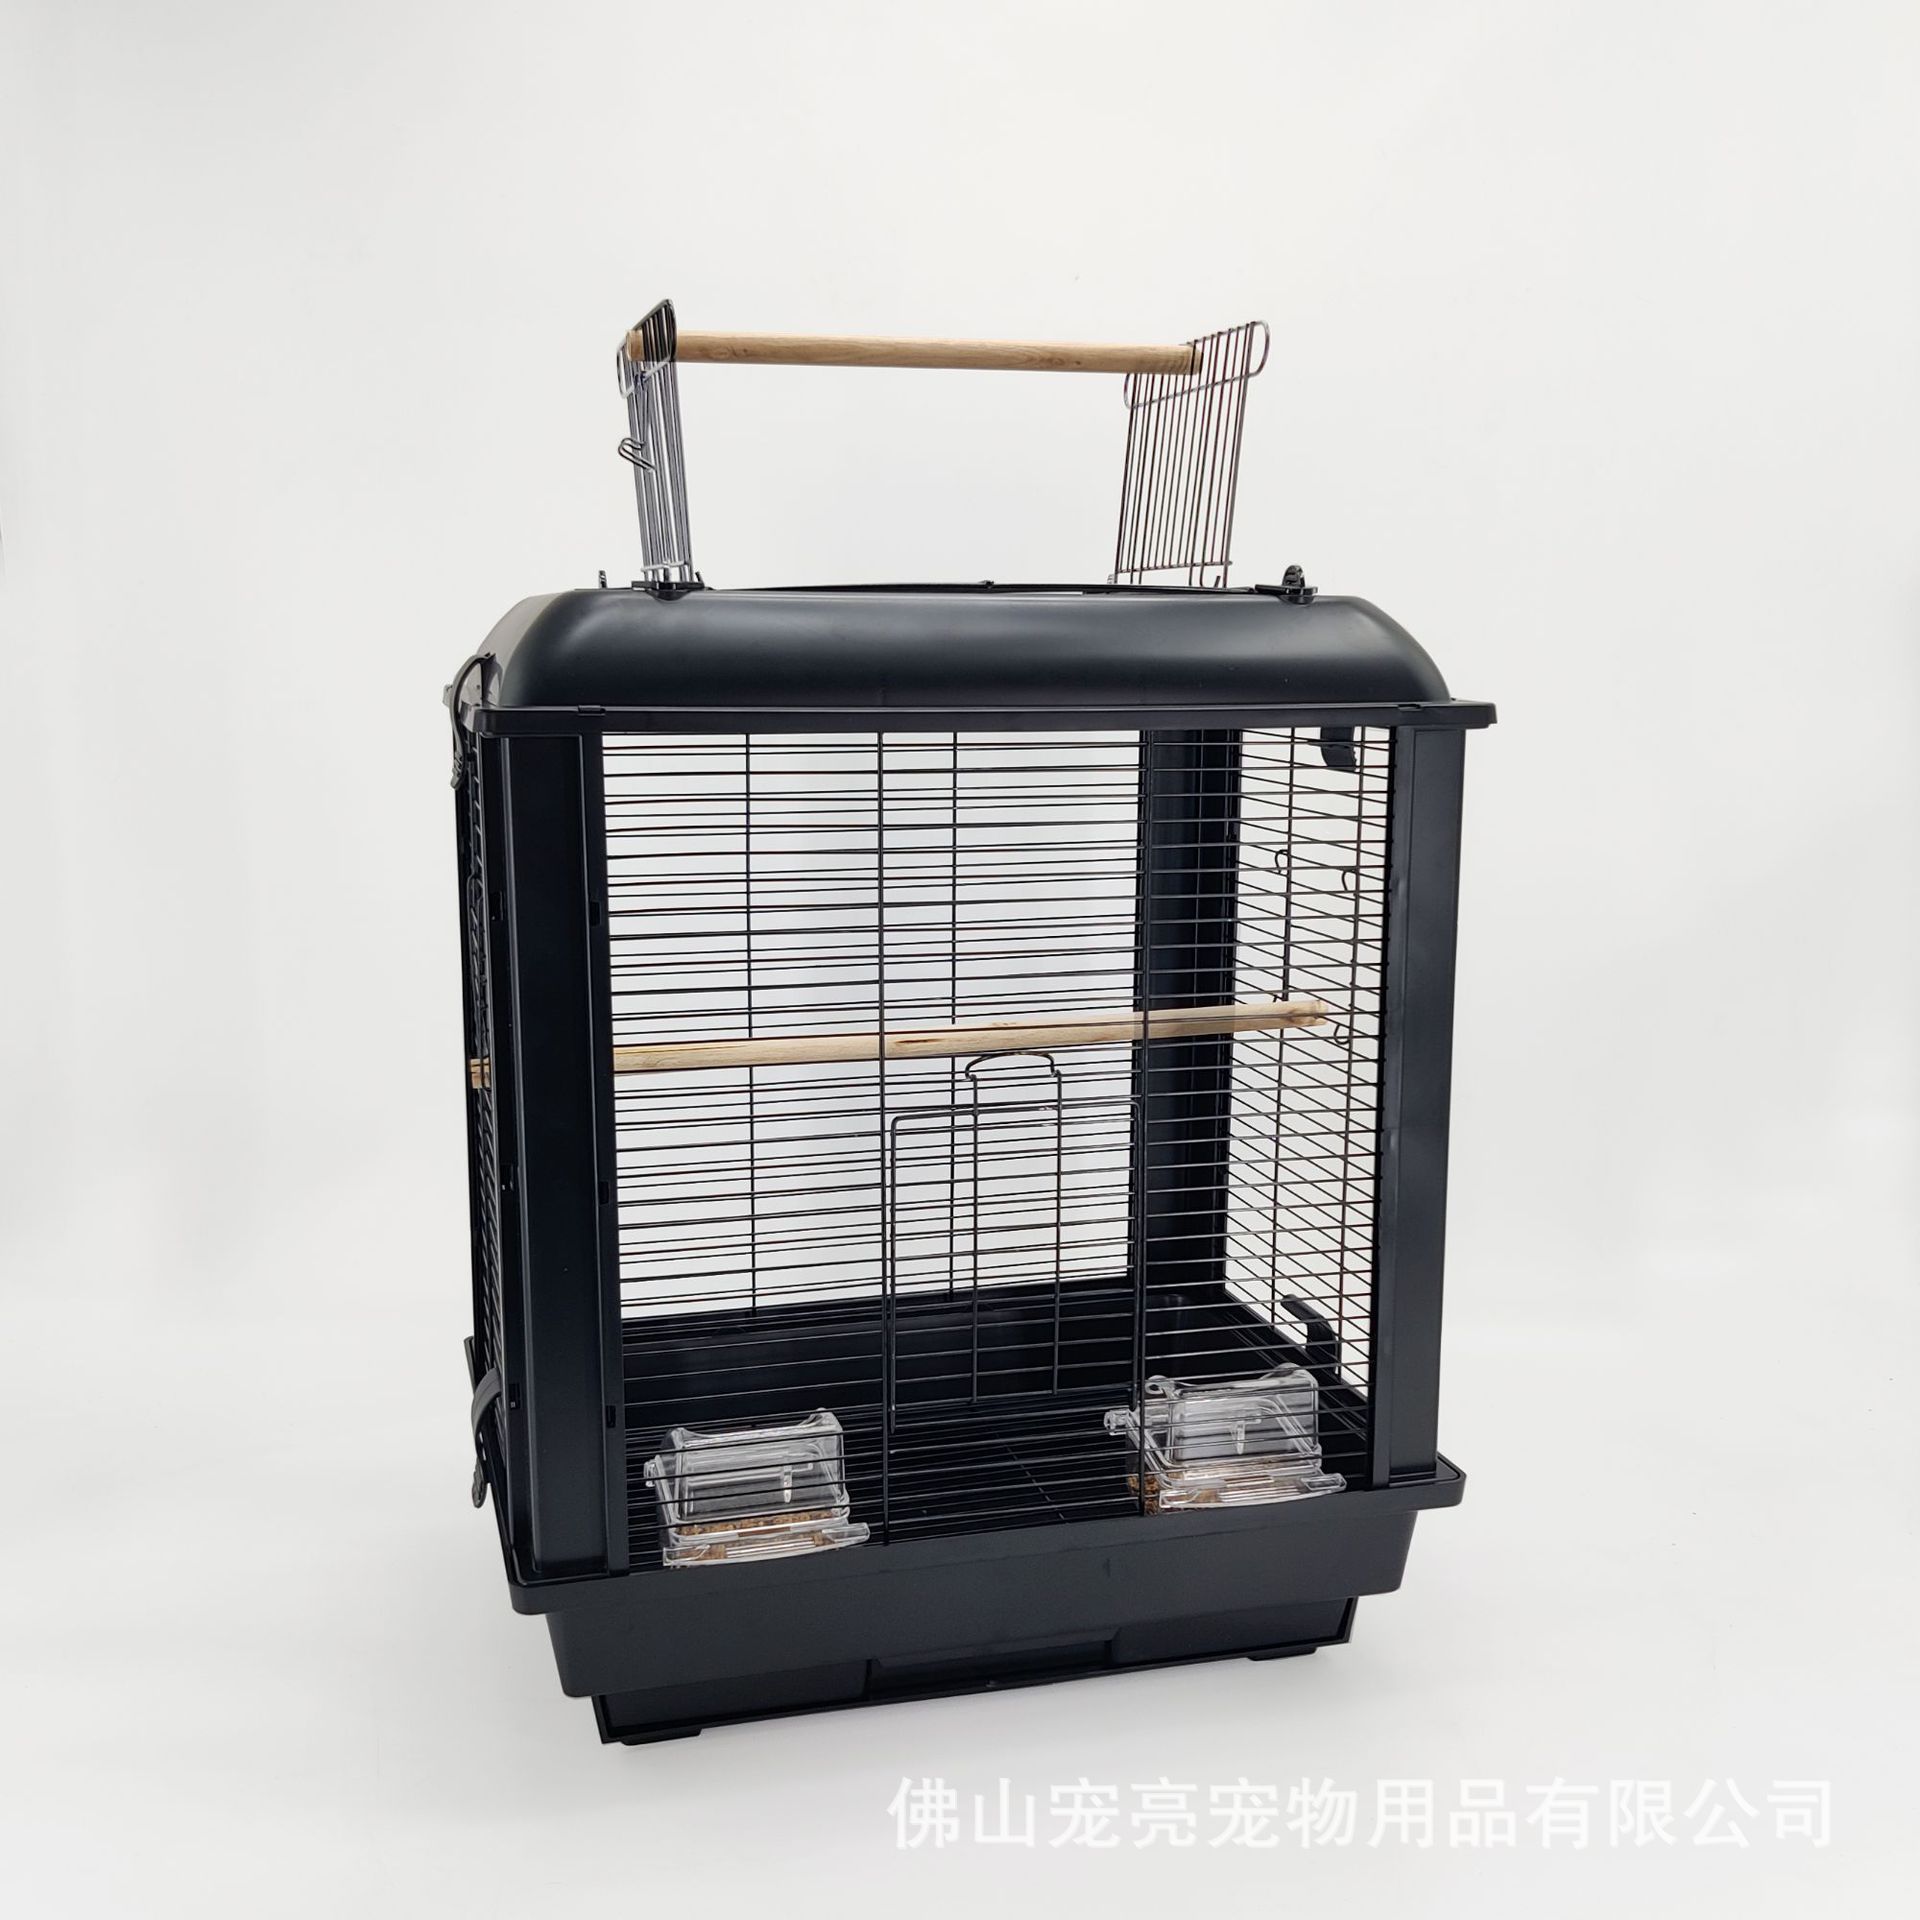 Parrot Bird Cage Large Space Ornamental Peony Tiger Skin Parrot Cage Large Bird Cage Wholesale